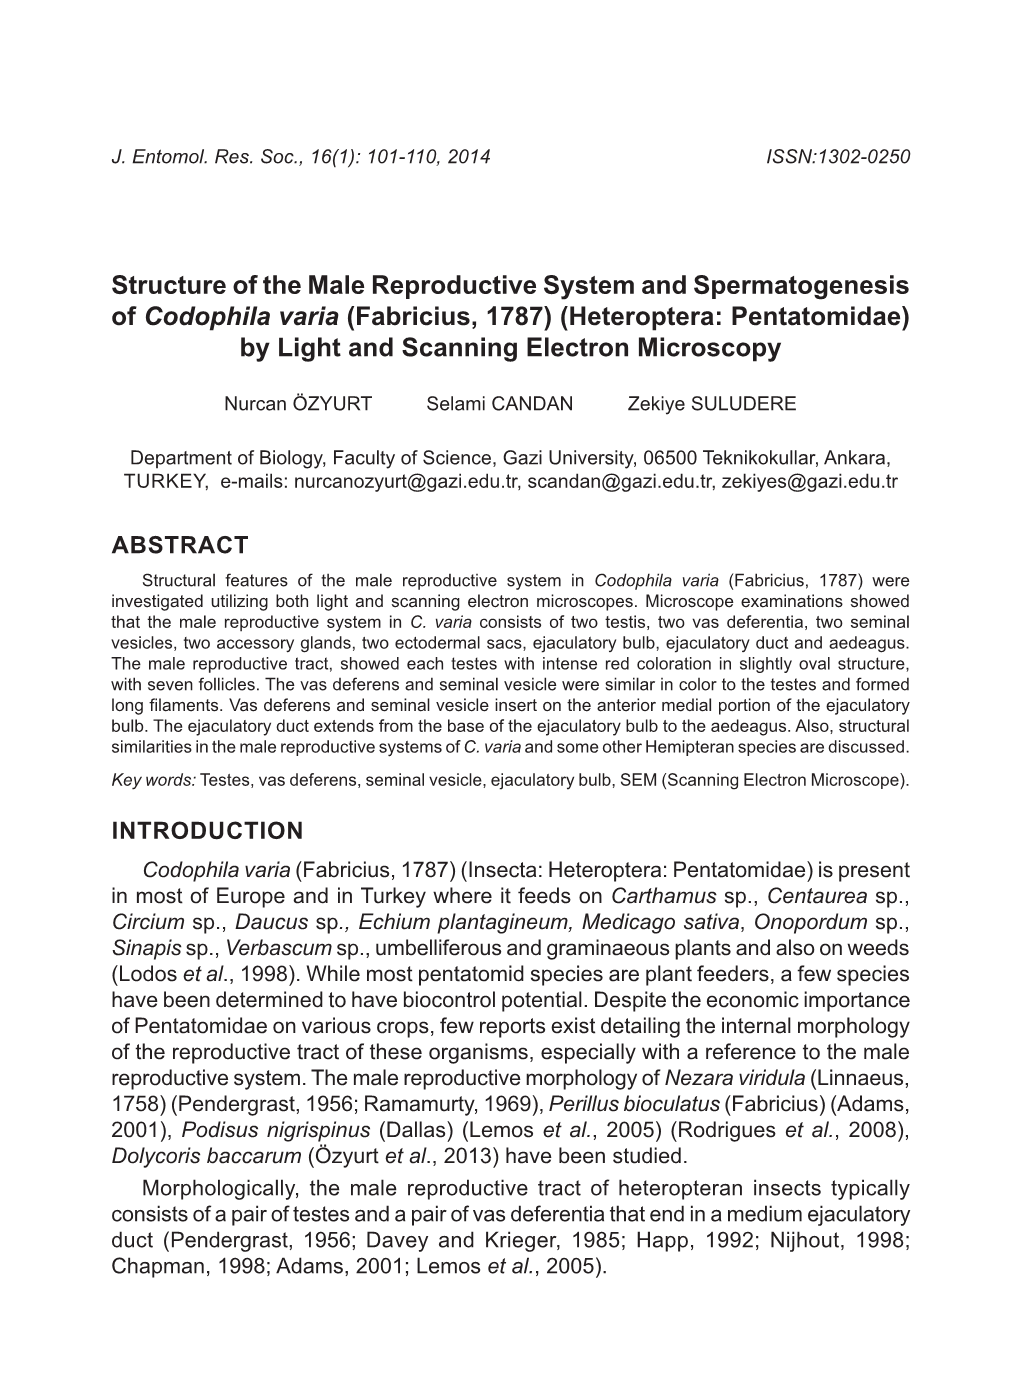 Structure of the Male Reproductive System and Spermatogenesis Of